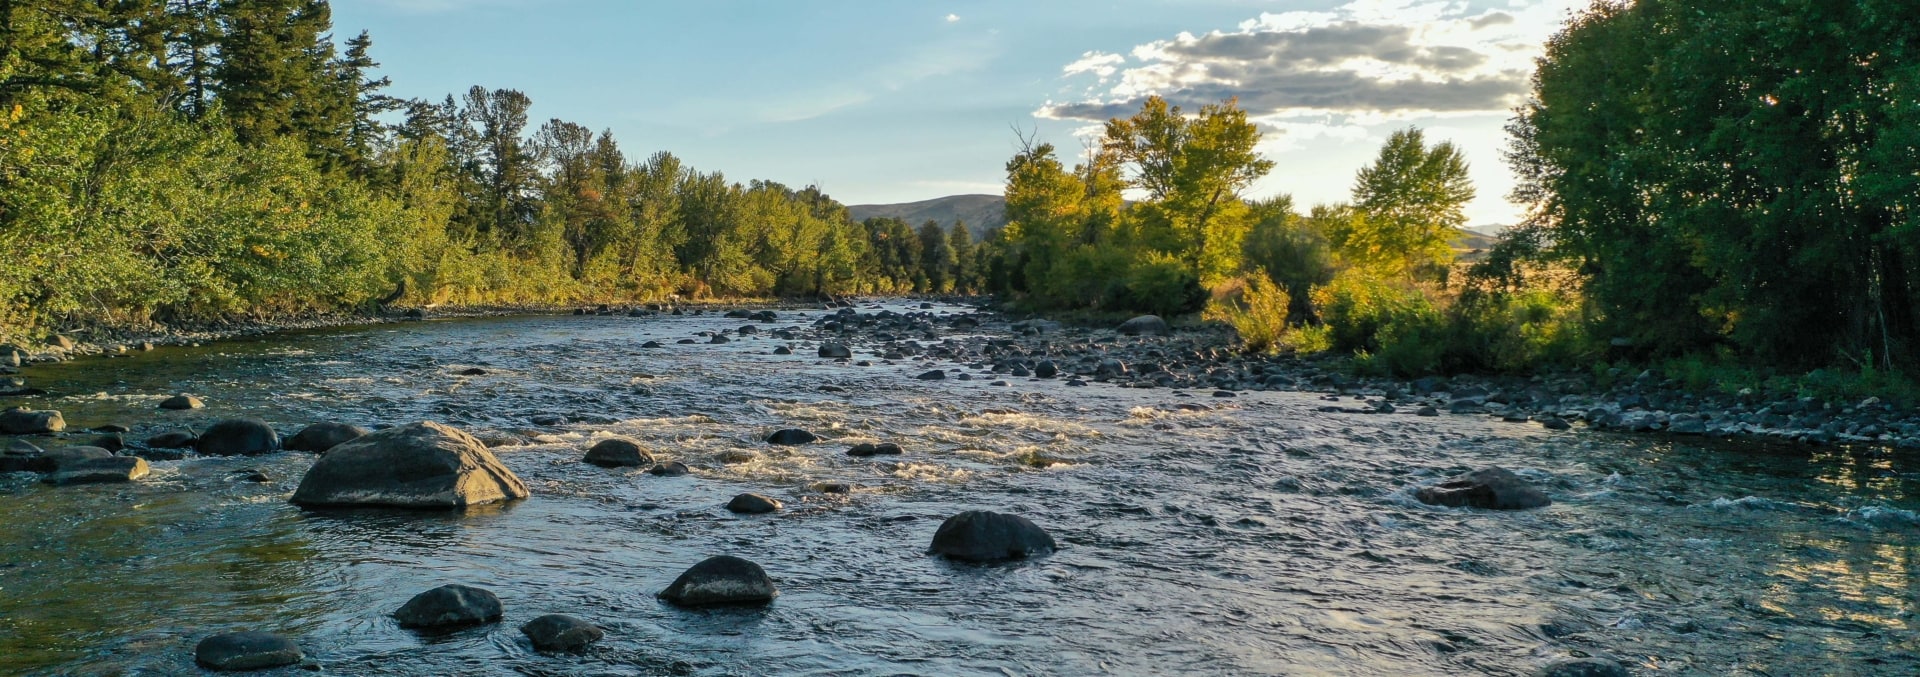 montana fishing property for sale boulder river confluence